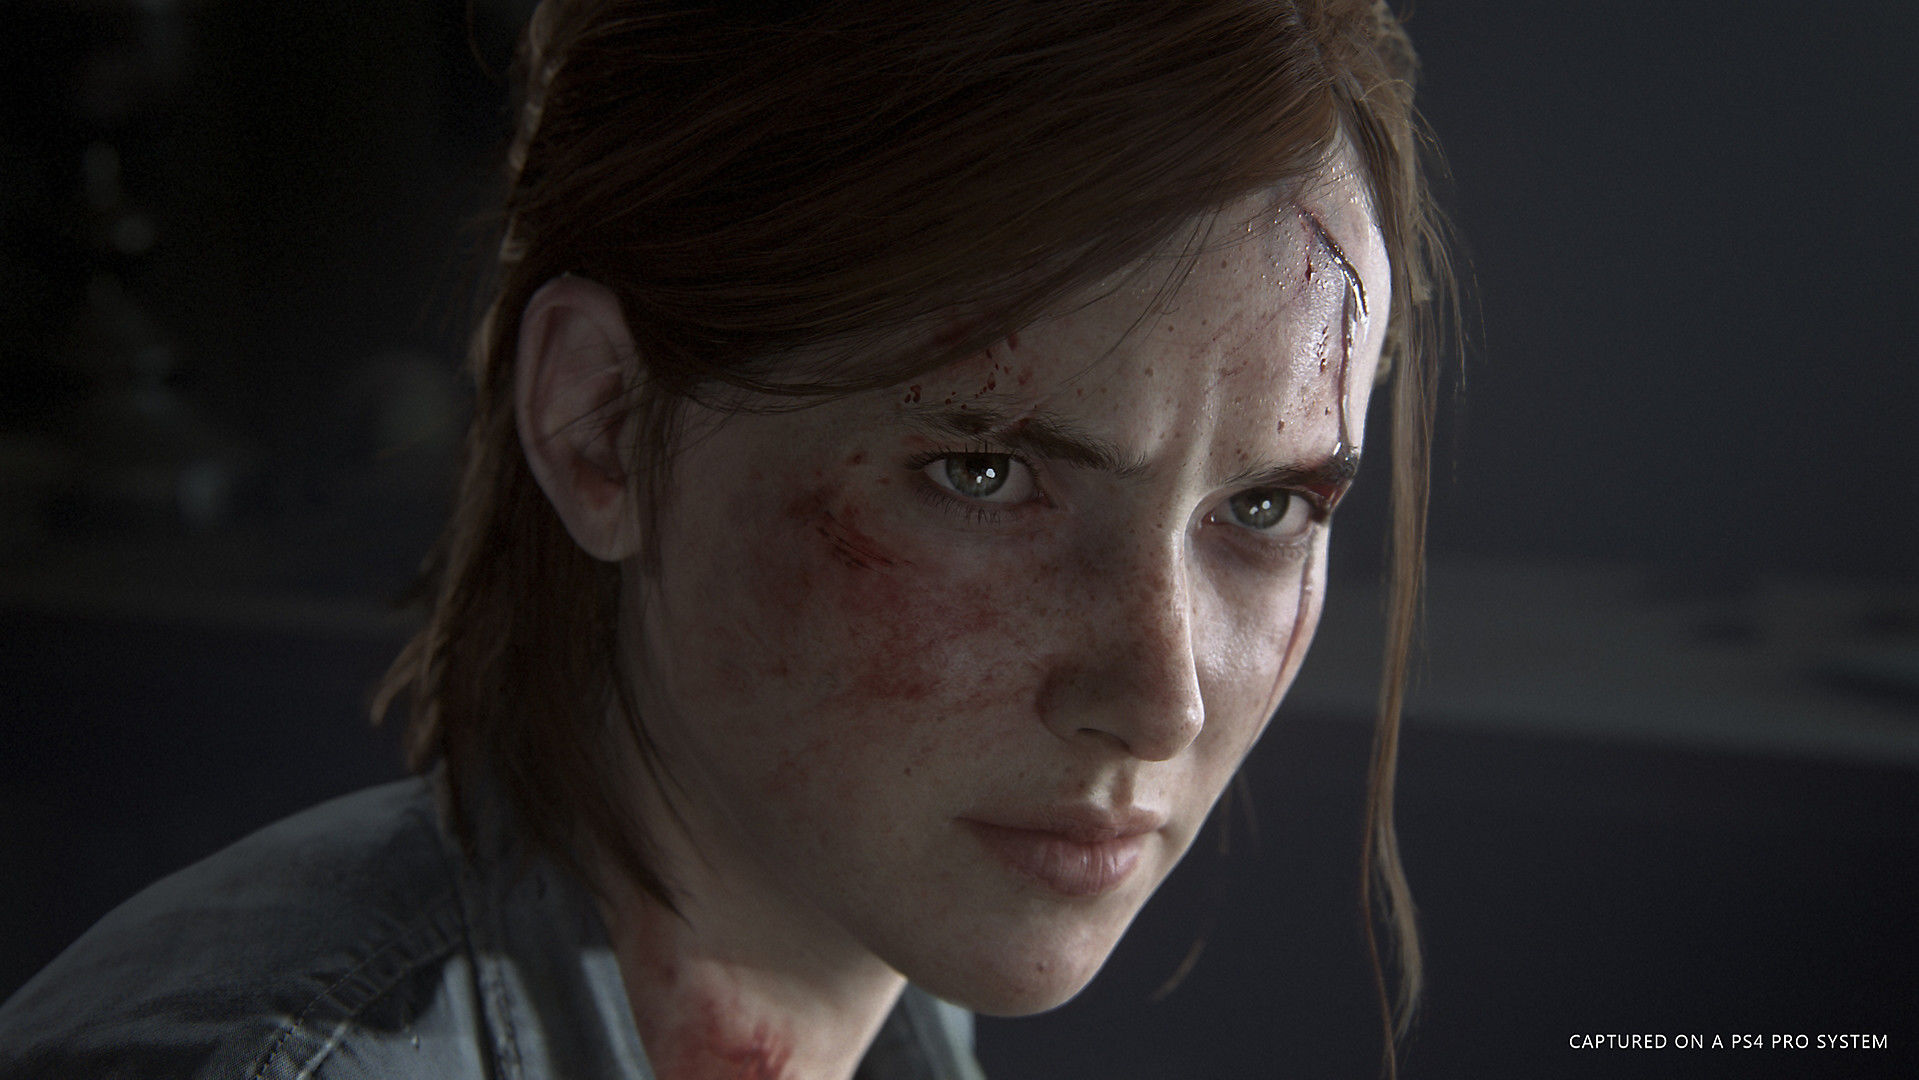 The Last of Us part 3: What we know so far